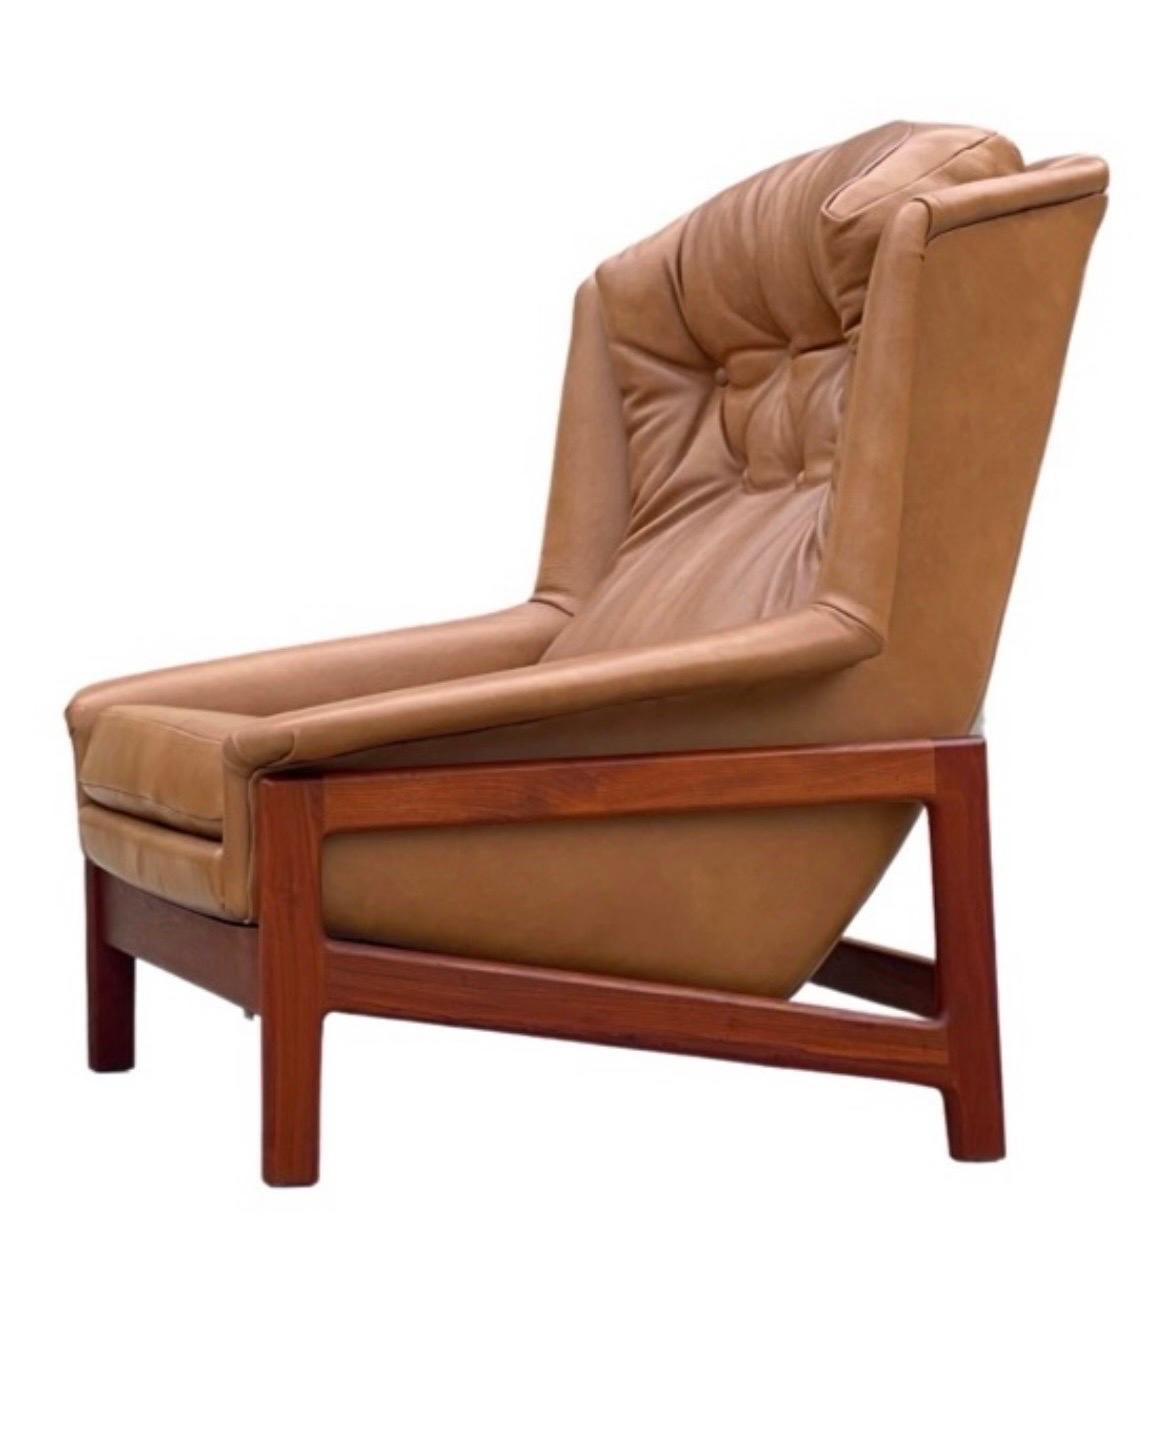 Unique on the market - oversized rocking and reclining lounge chair by Folke Ohlsson for DUX. Built in Sweden, circa 1968. This was the top of the line model that DUX offered - the chair rocks smoothly within its base and locks in 8 different